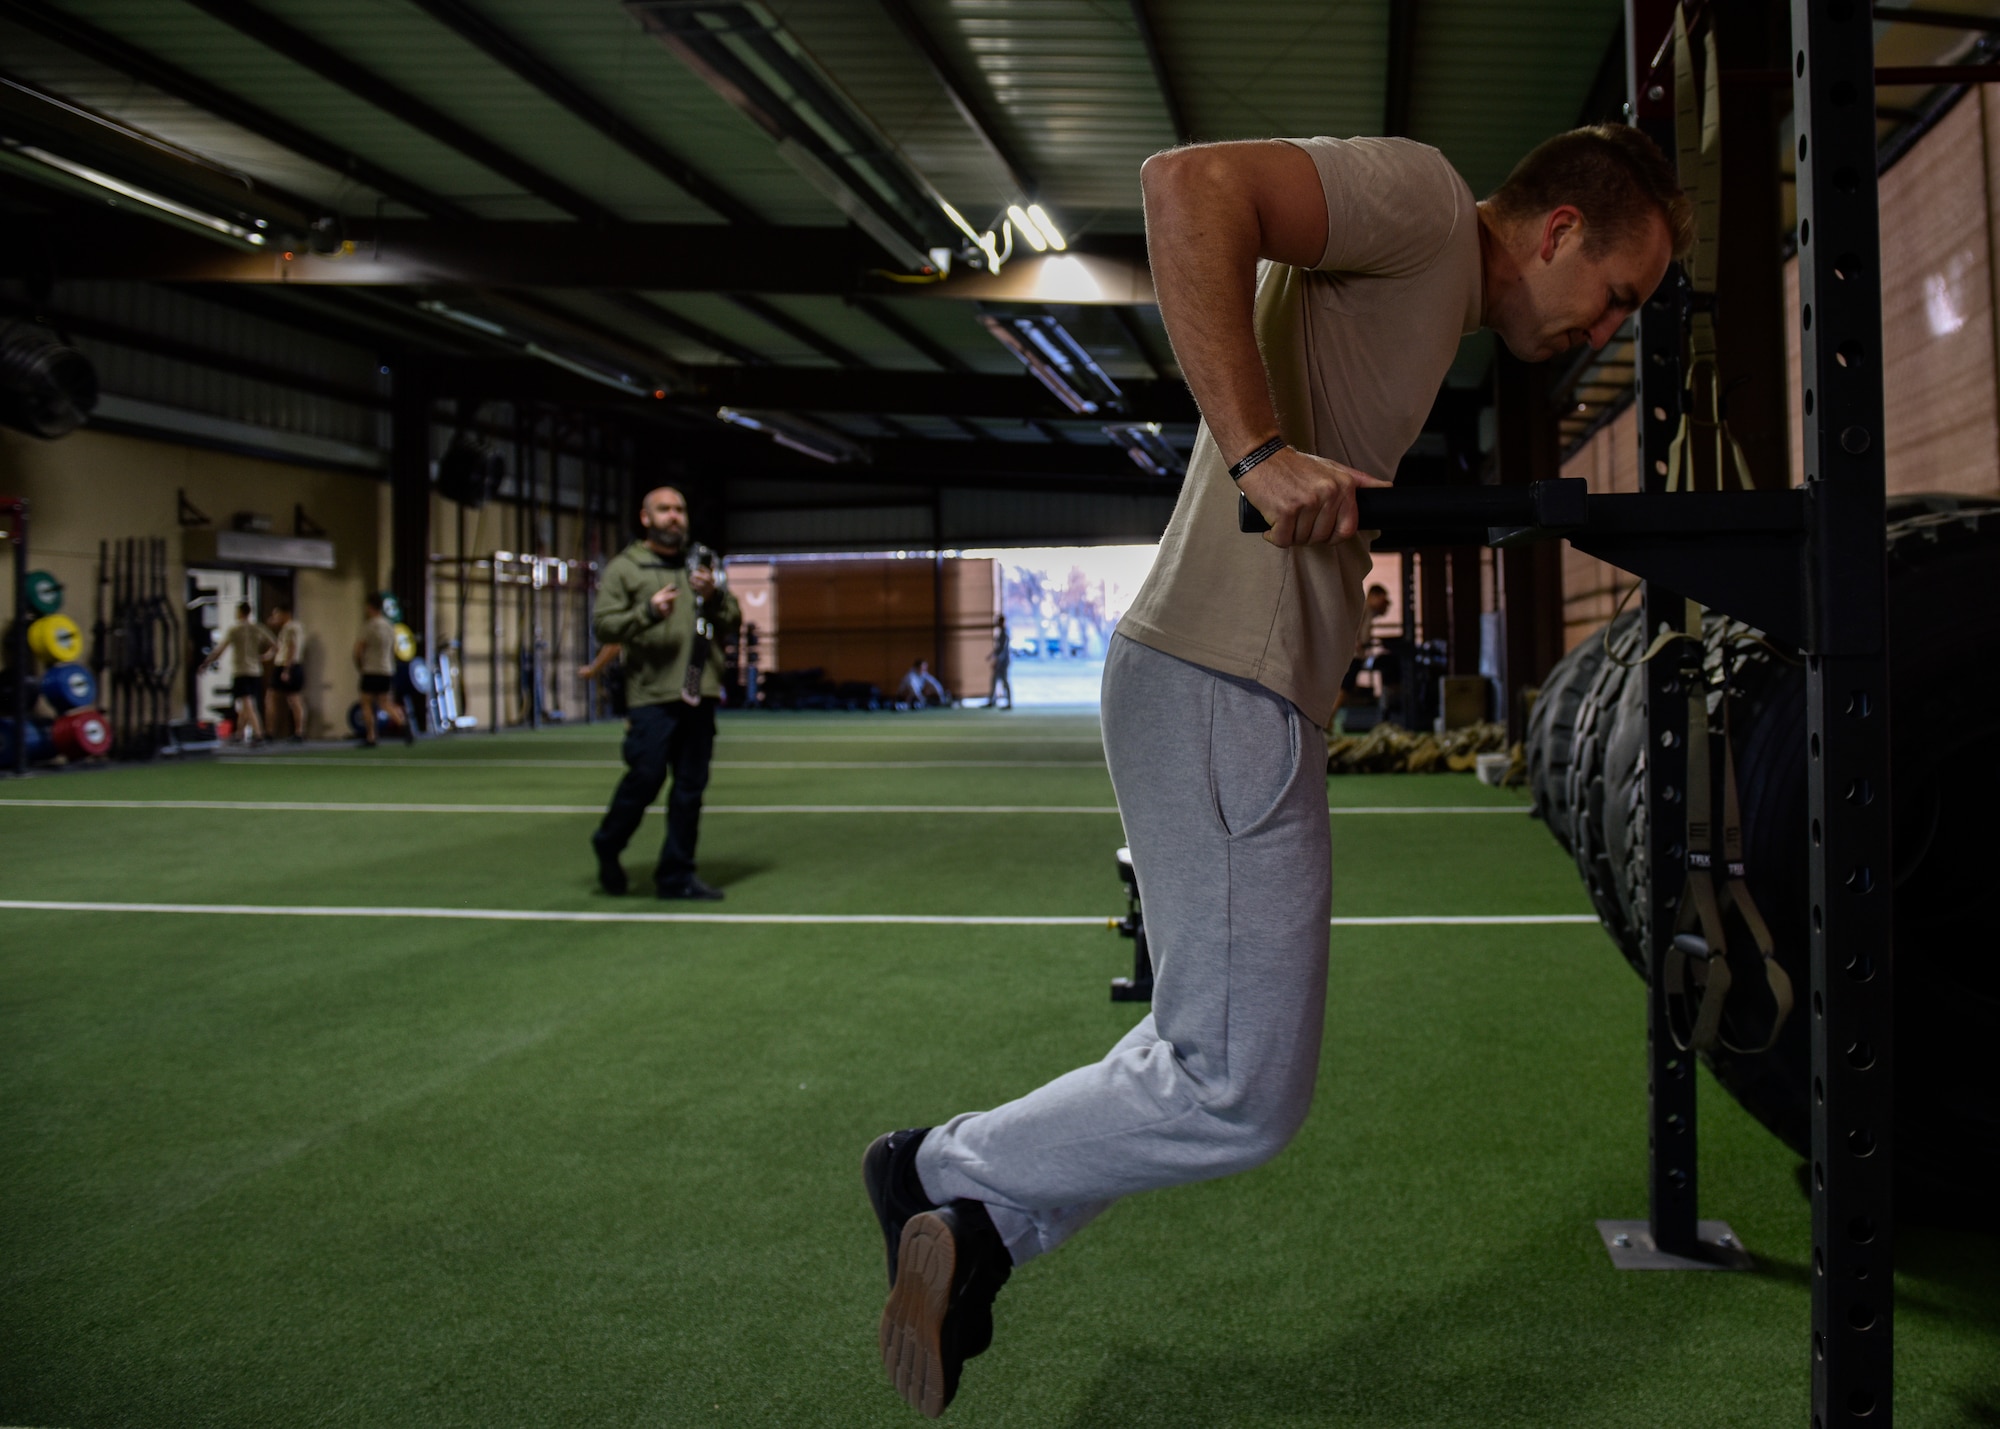 A participant in the Maltz Challenge performs the dip exercise at Kirtland Air Force Base, N.M., March 15, 2019. In addition to honoring U.S. Air Force Master Sgt. Michael Maltz, the 351st Special Warfare Training Squadron (U.S. AF Pararescue School) honored U.S. Air Force Capt. Mark Weber, a combat rescue officer who was killed-in-action March 15, 2018. (U.S. Air Force photo by Airman 1st Class Austin J. Prisbrey)